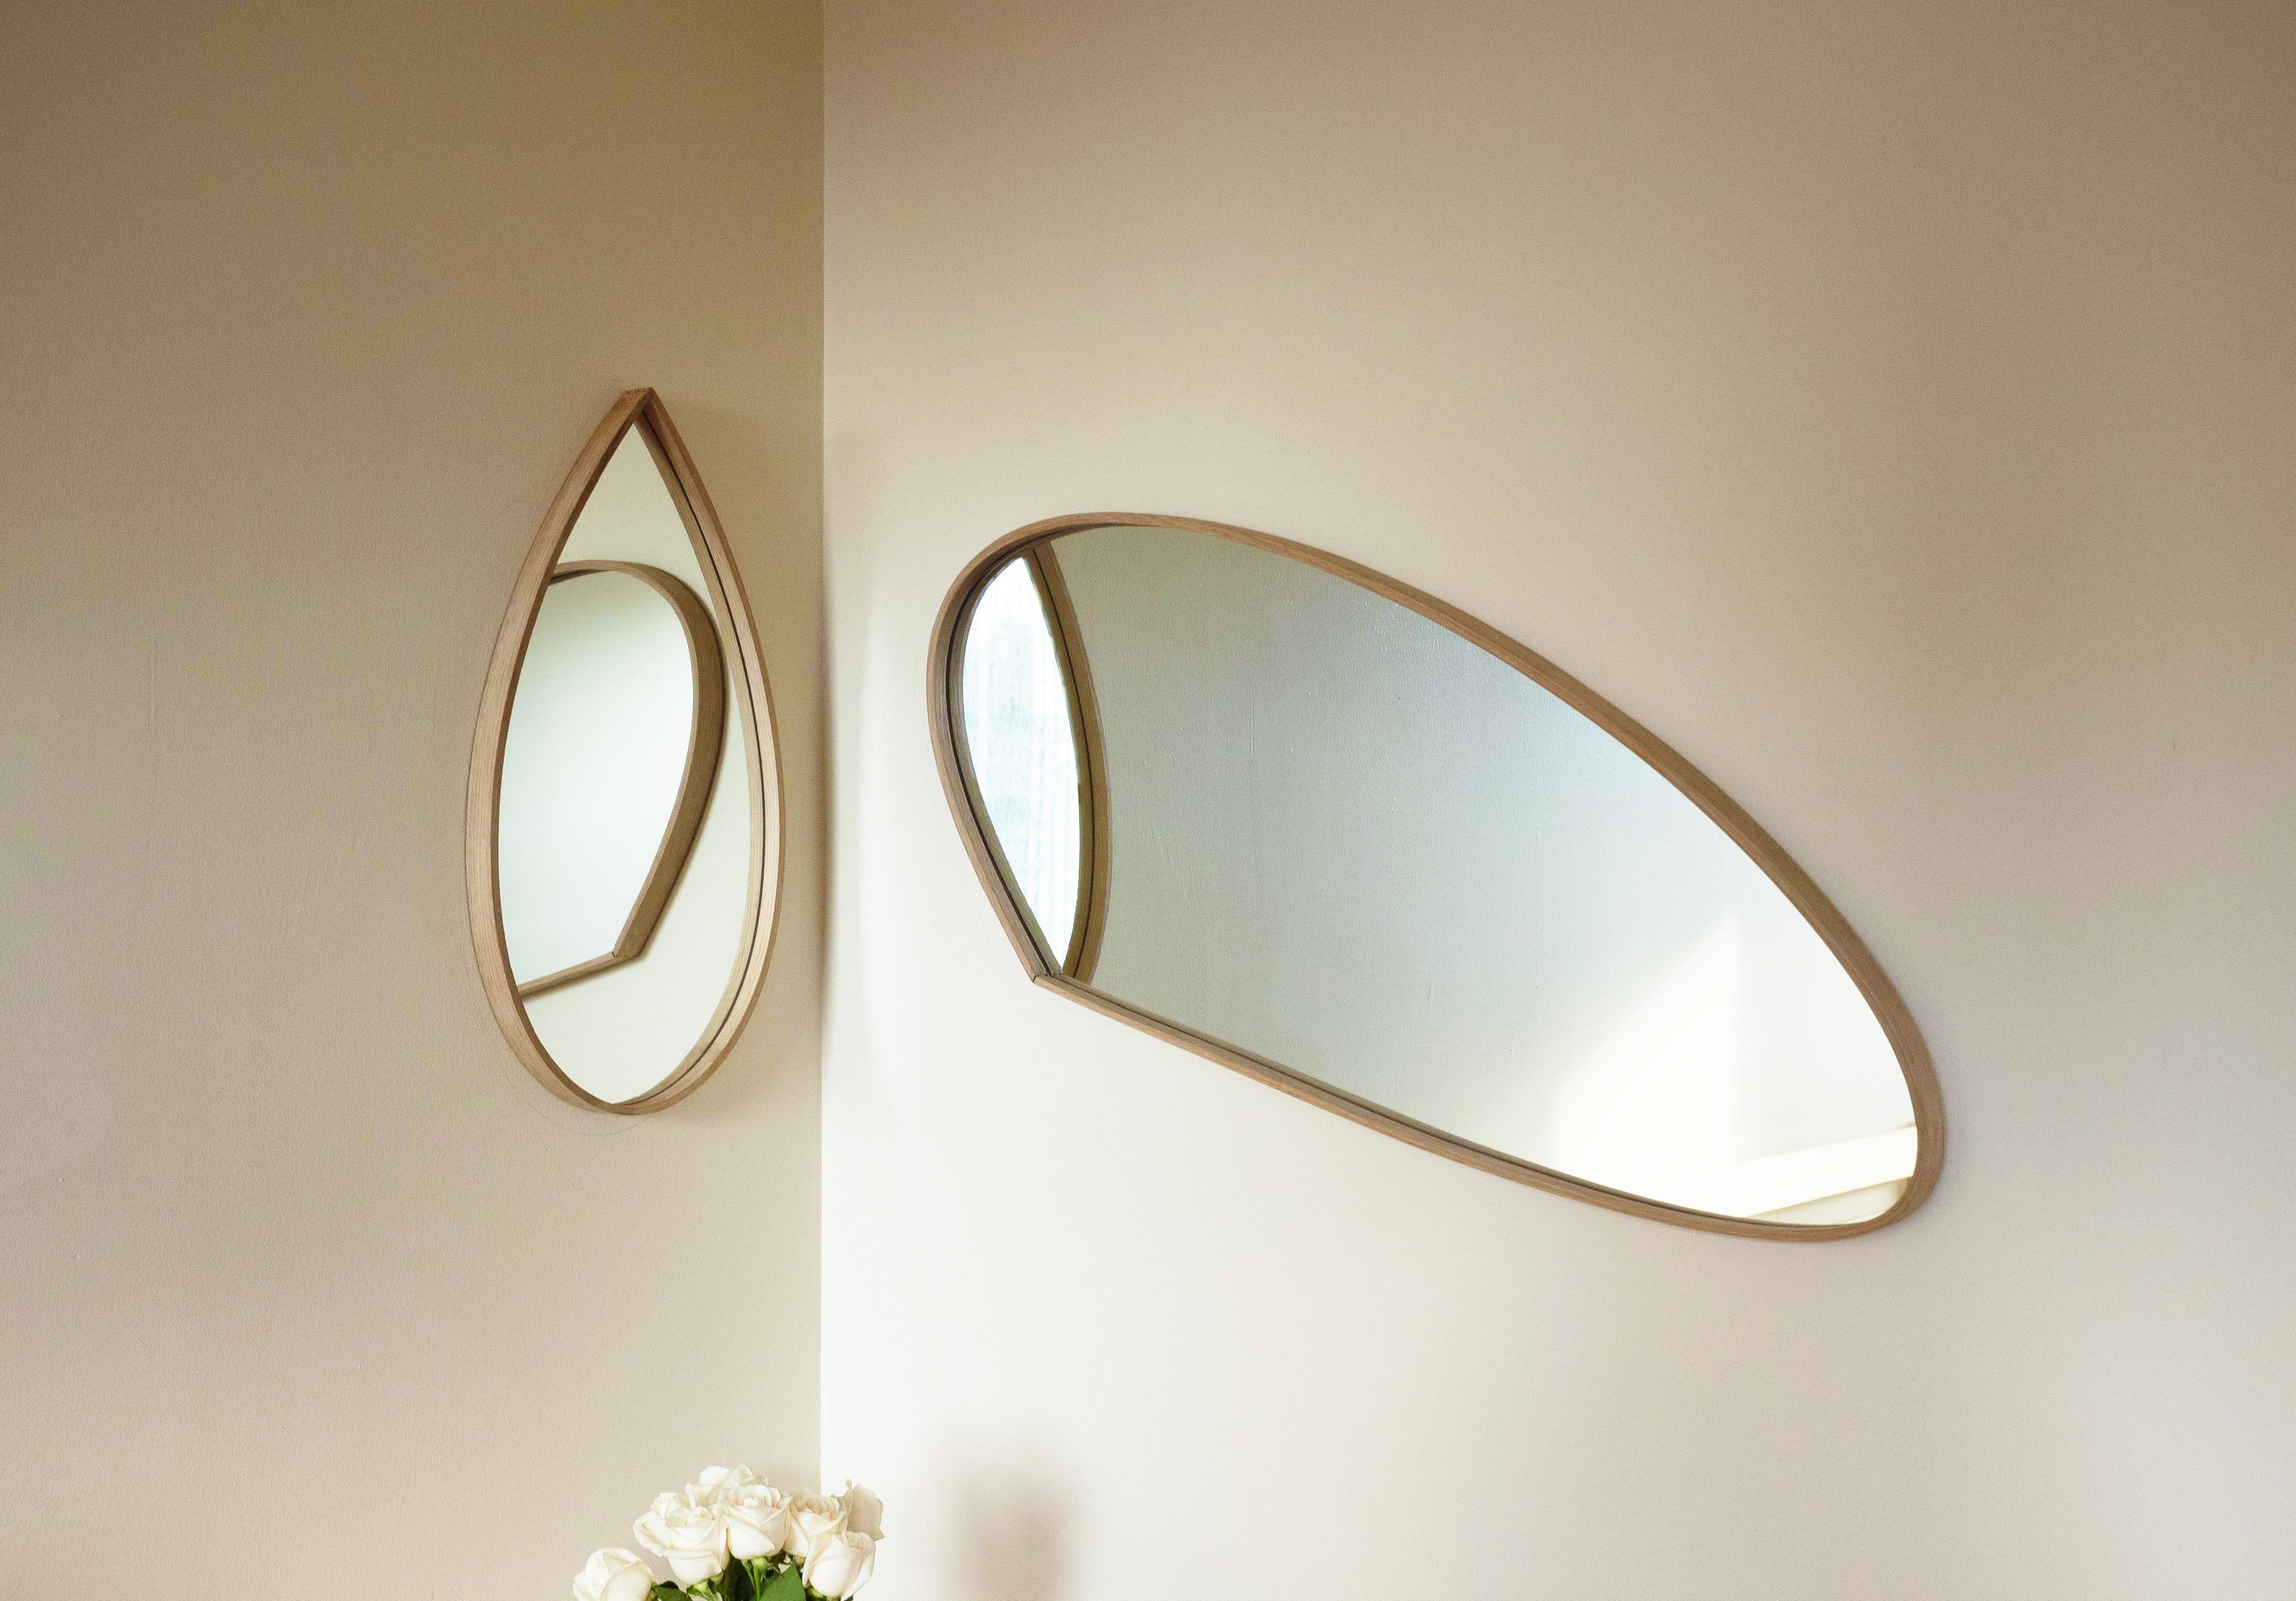 These Corner Mirrors by Soo Joo have a timeless beauty that is not affected by changing trends and can be enjoyed for decades. The sculptural mirror fits into any interior with its natural wooden material and its distilled form, and elevates any